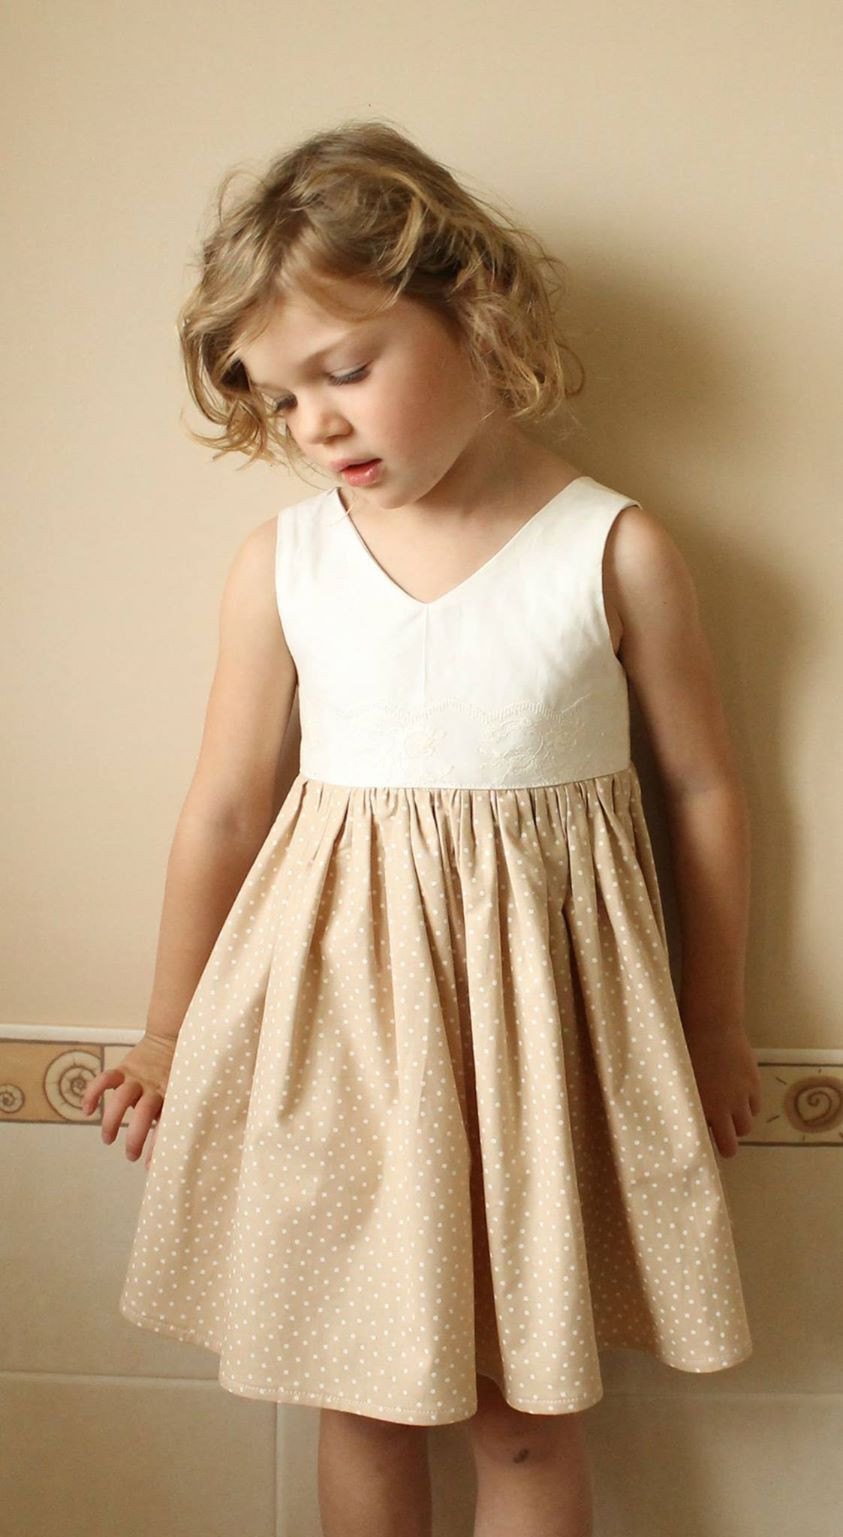 Tea Party Dresses For Kids
 Tea Party Dress Sewing Pattern